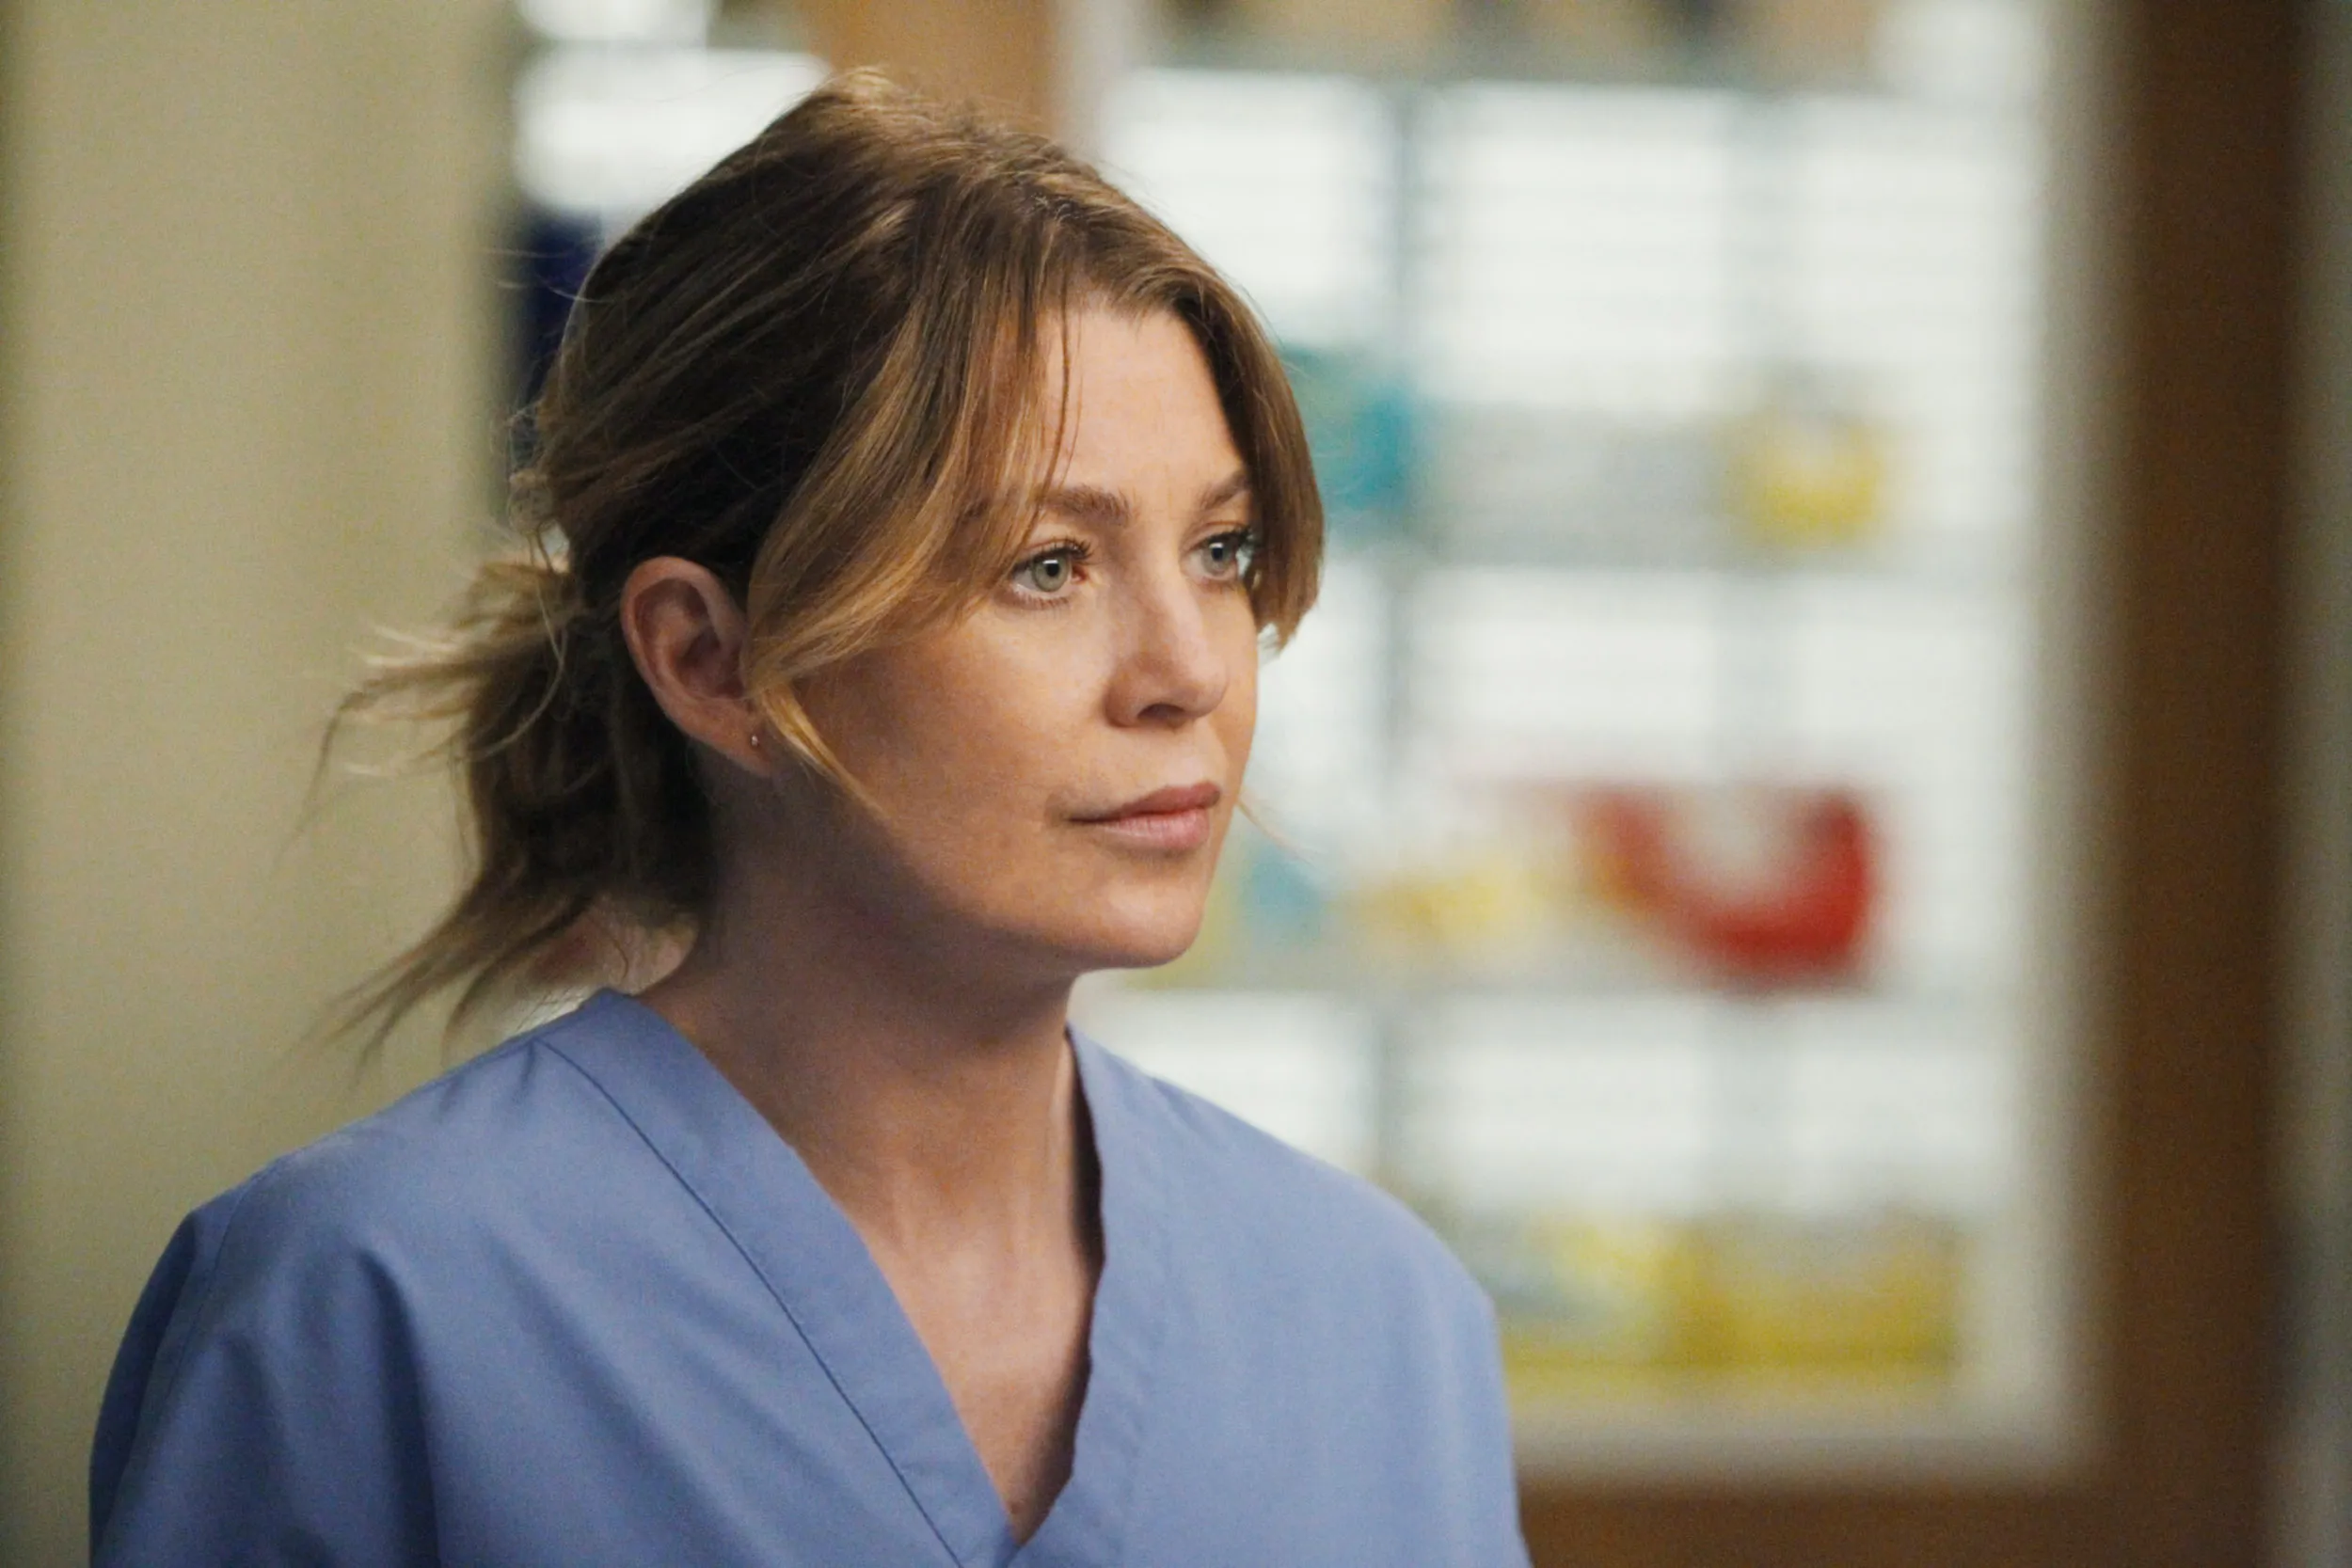 Things You Might Not Know About Grey’s Anatomy’s Ellen Pompeo